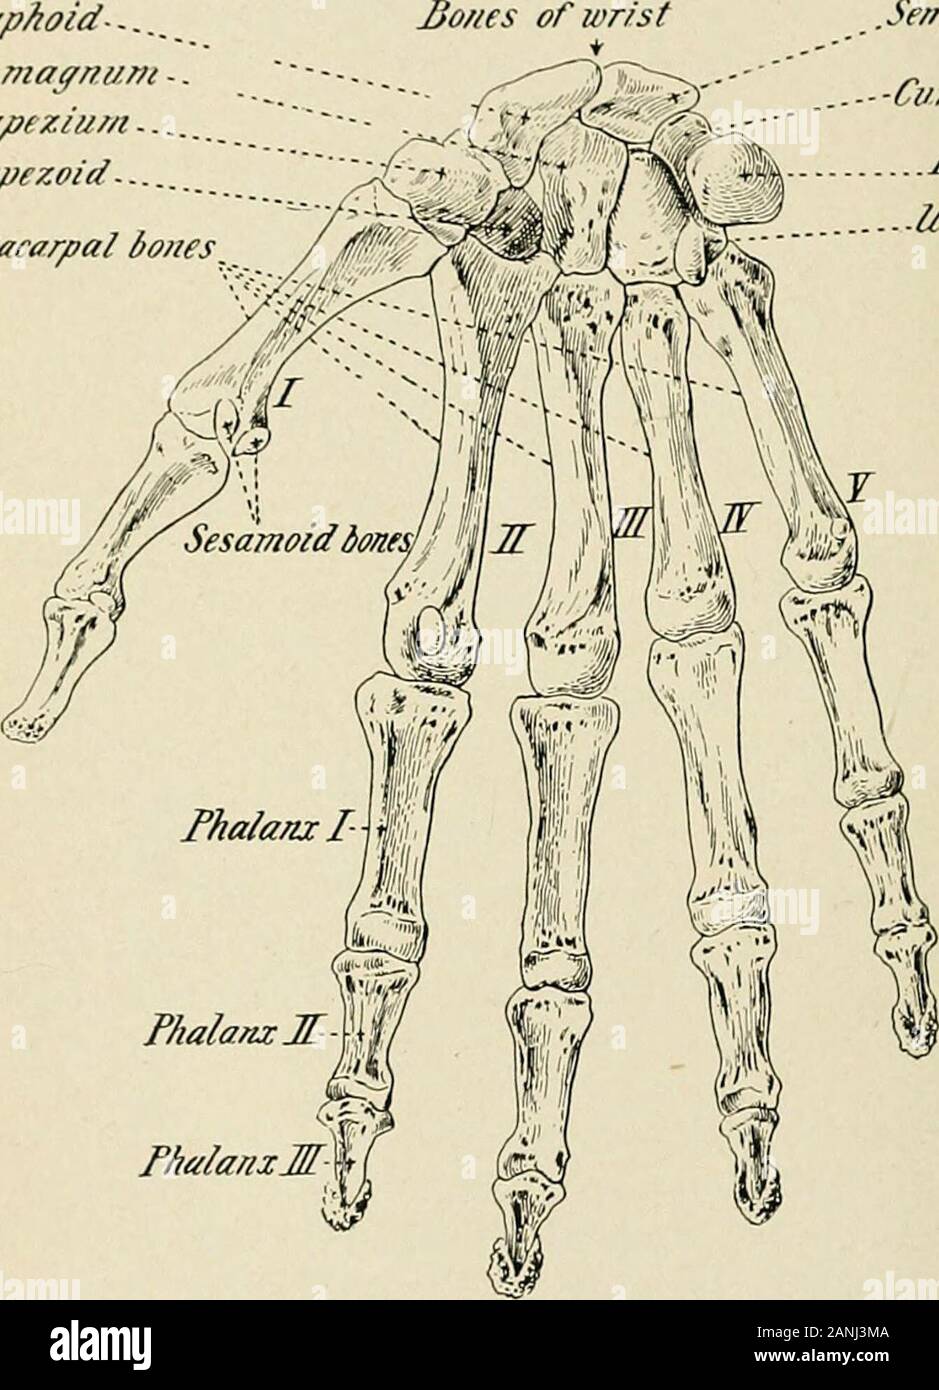 A text-book of first aid and emergency treatment . or dislocation ofthese bones with any degree of certainty. The Metacarpus.—There are five elongated bones, one foreach digit, called metacarpal bones. In general, they occupythe location of what is commonly called the palm of the hand. The Phalanges.—^Two shorter bones, similar in shape tothe metacarpals, go to make up the thumb. They are calledthe phalanges. The one nearest the hand is designated asthe proximal phalanx, and the one forming the tip of thethumb is called the terminal, or distal phalanx. In the fin-gers are found analogous bones Stock Photo